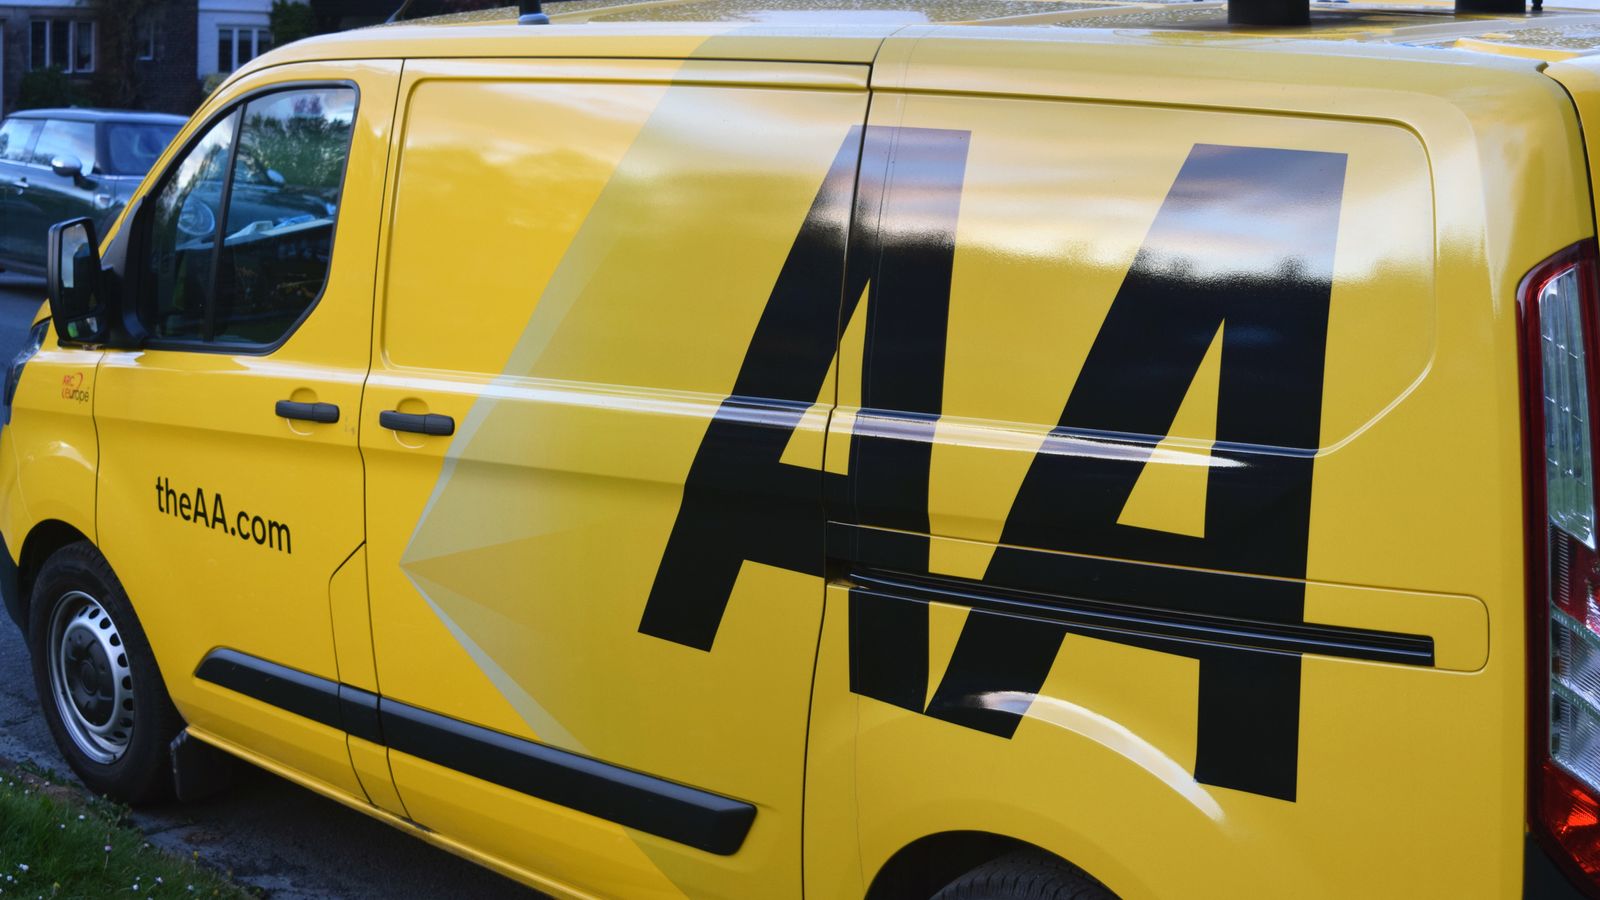 AA-backer Warburg Pincus poaches leading City banker Sibbald for European role